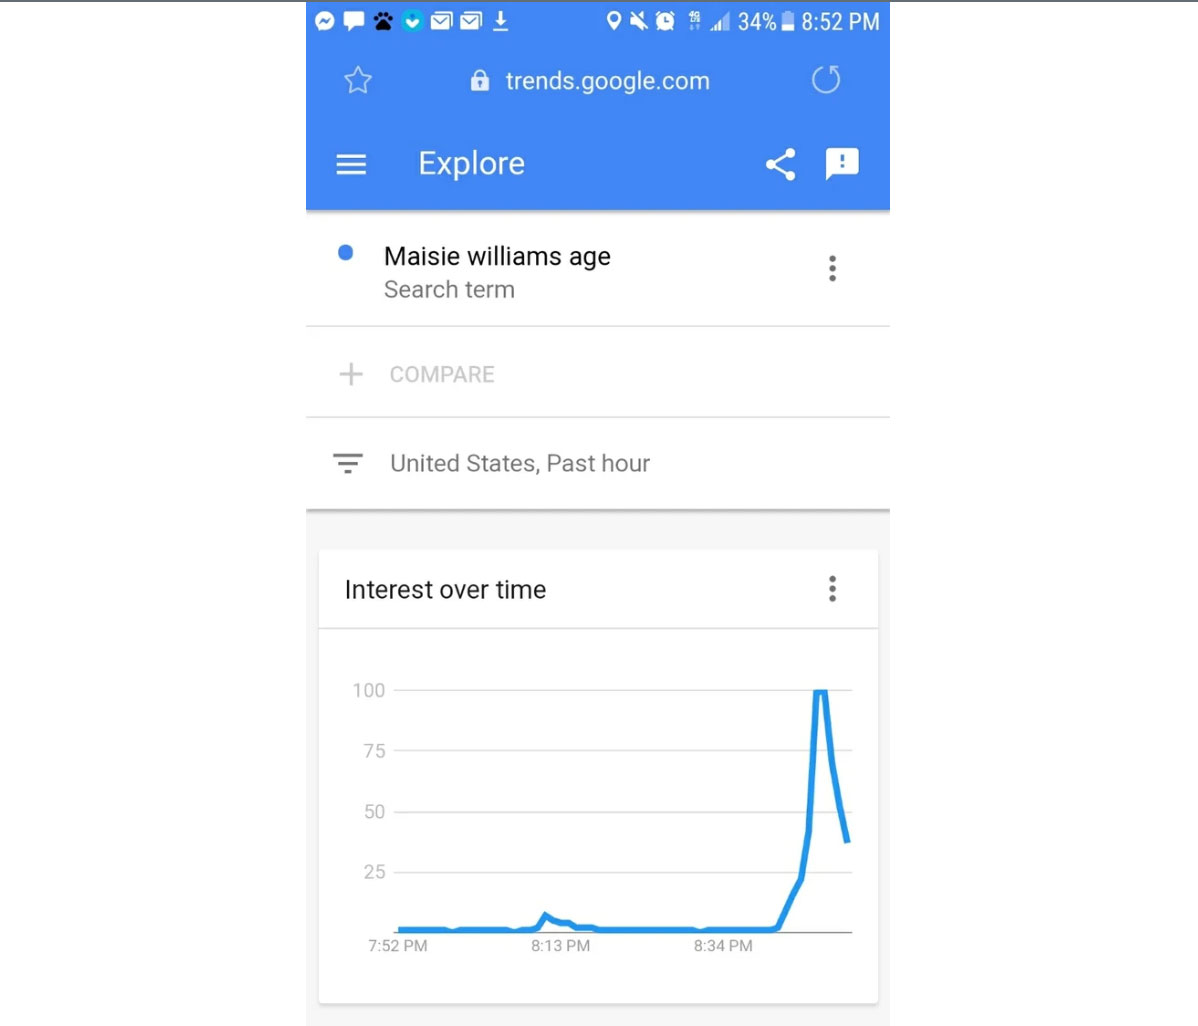 Google trends search for Maisie Williams age